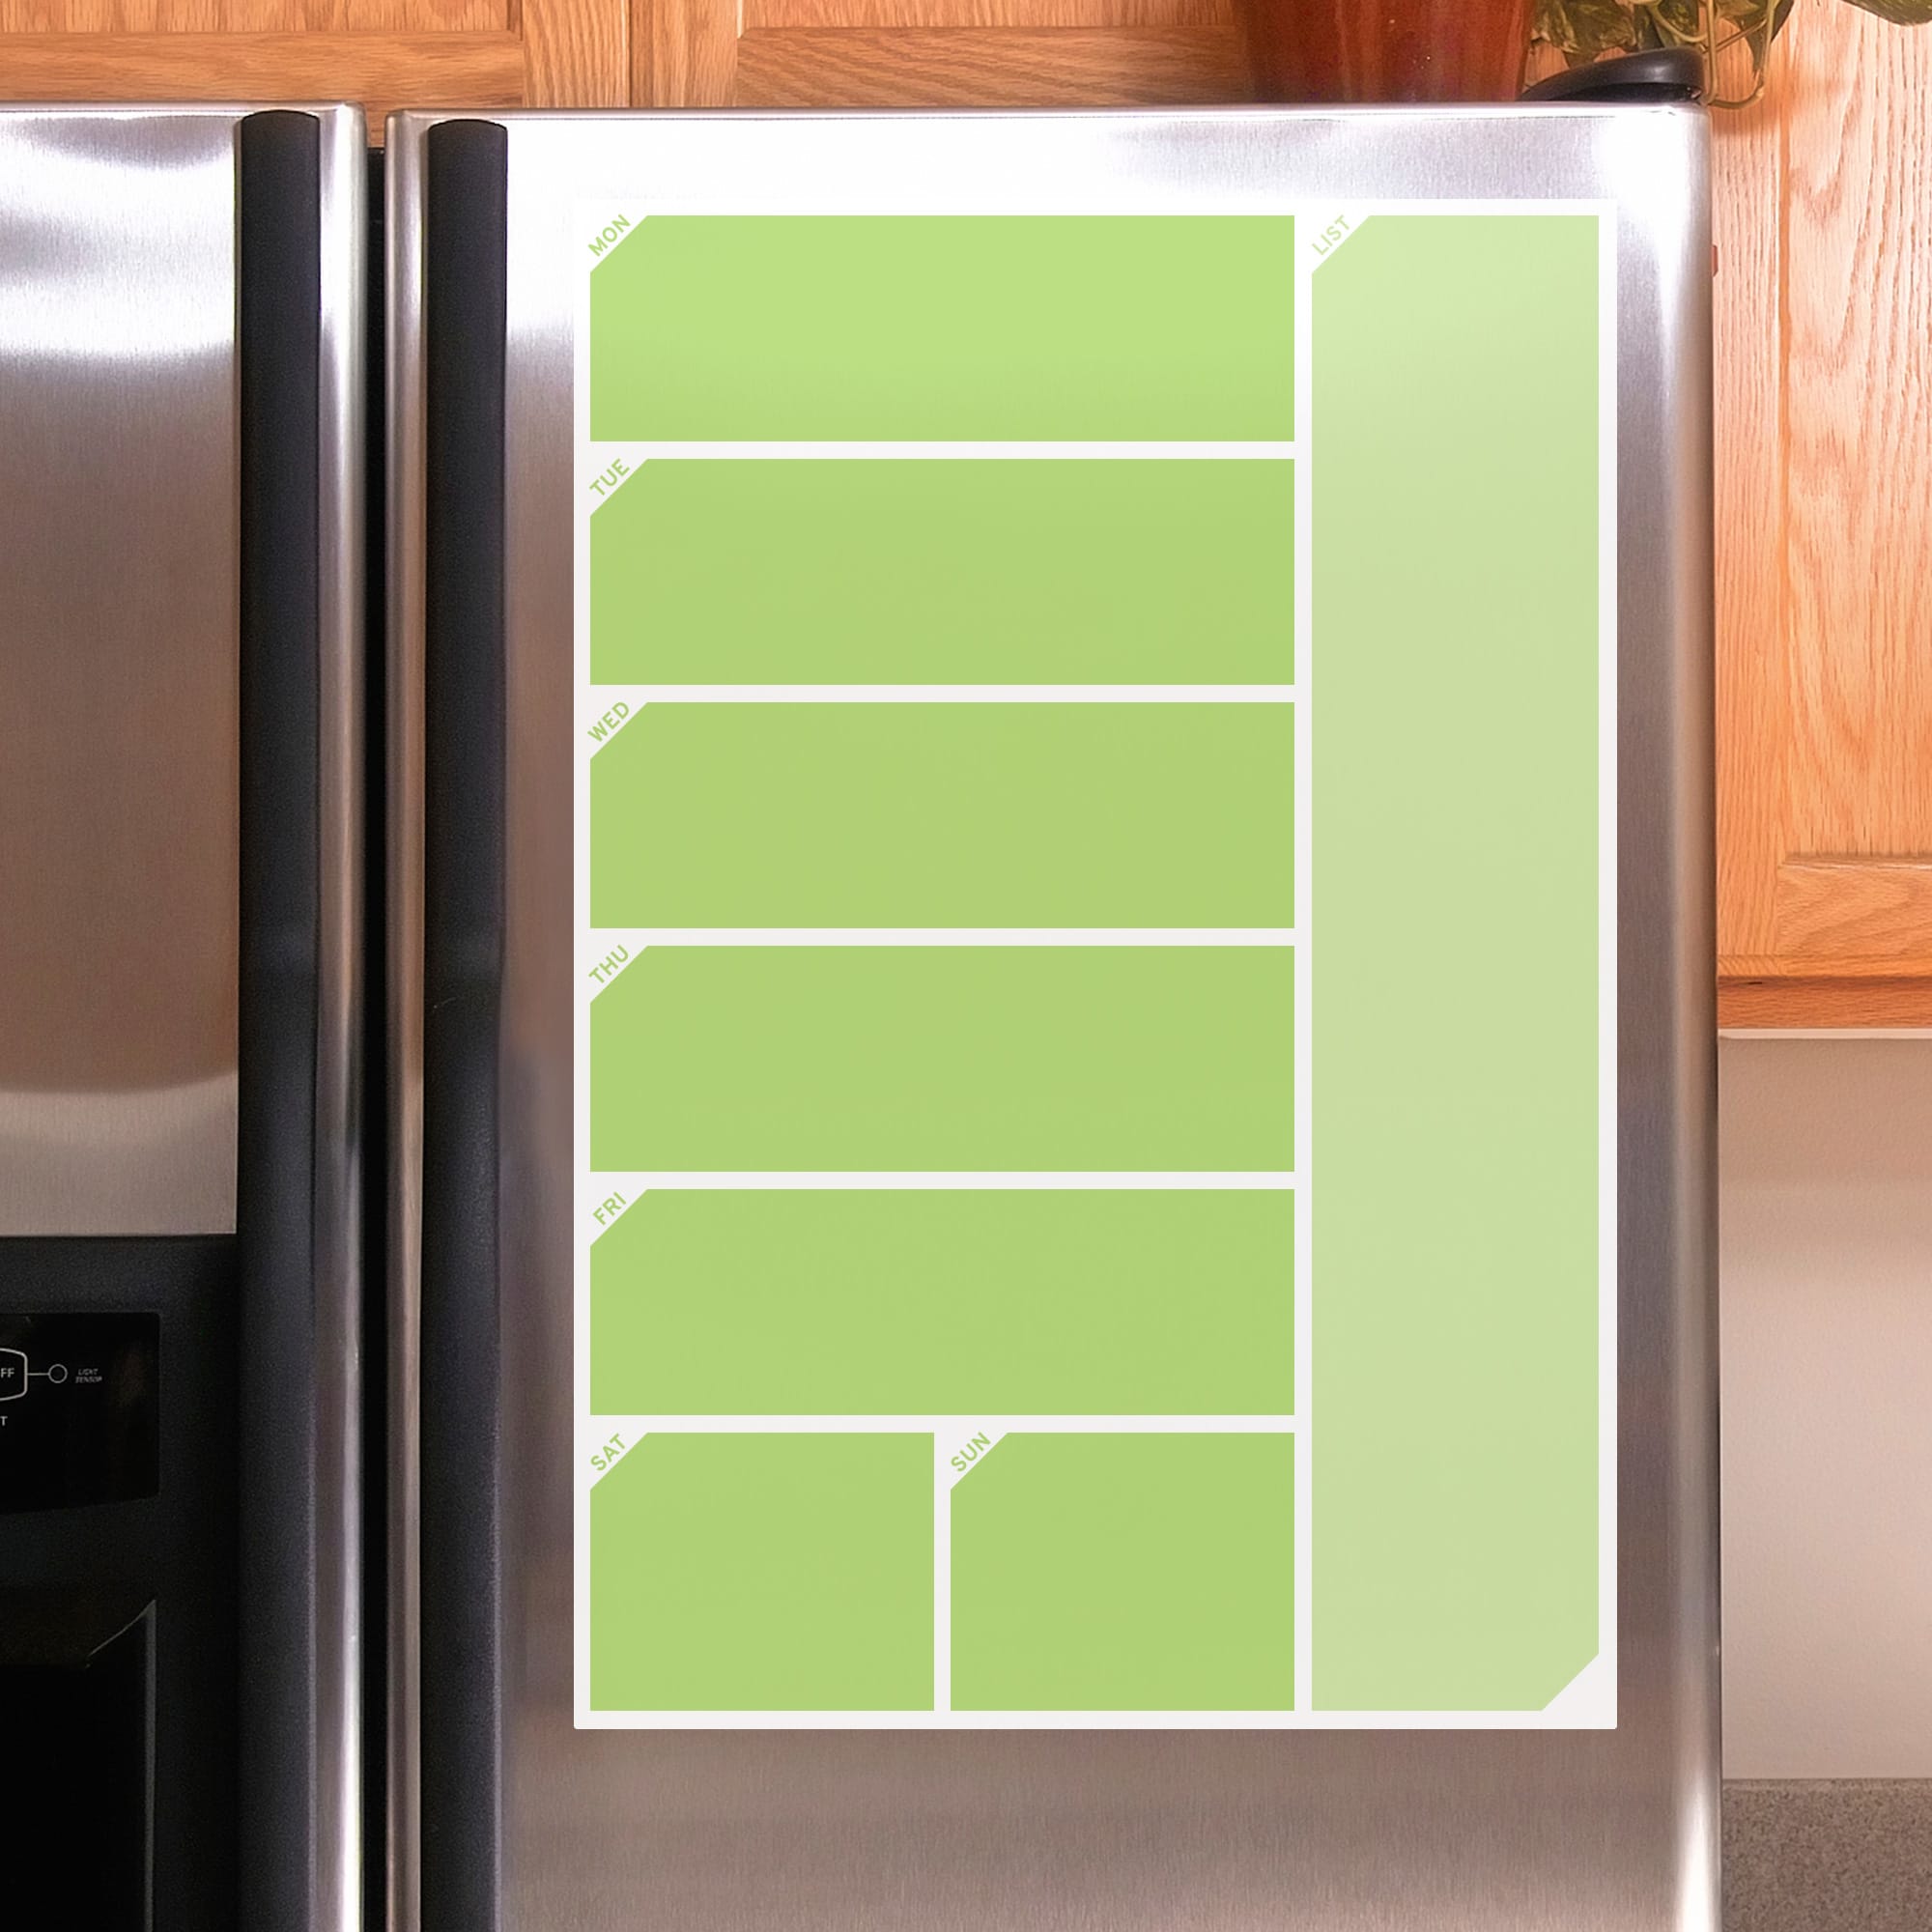 Grocery List - Removable Dry Erase Vinyl Decal in Green (12"W x 17"H) by Fathead